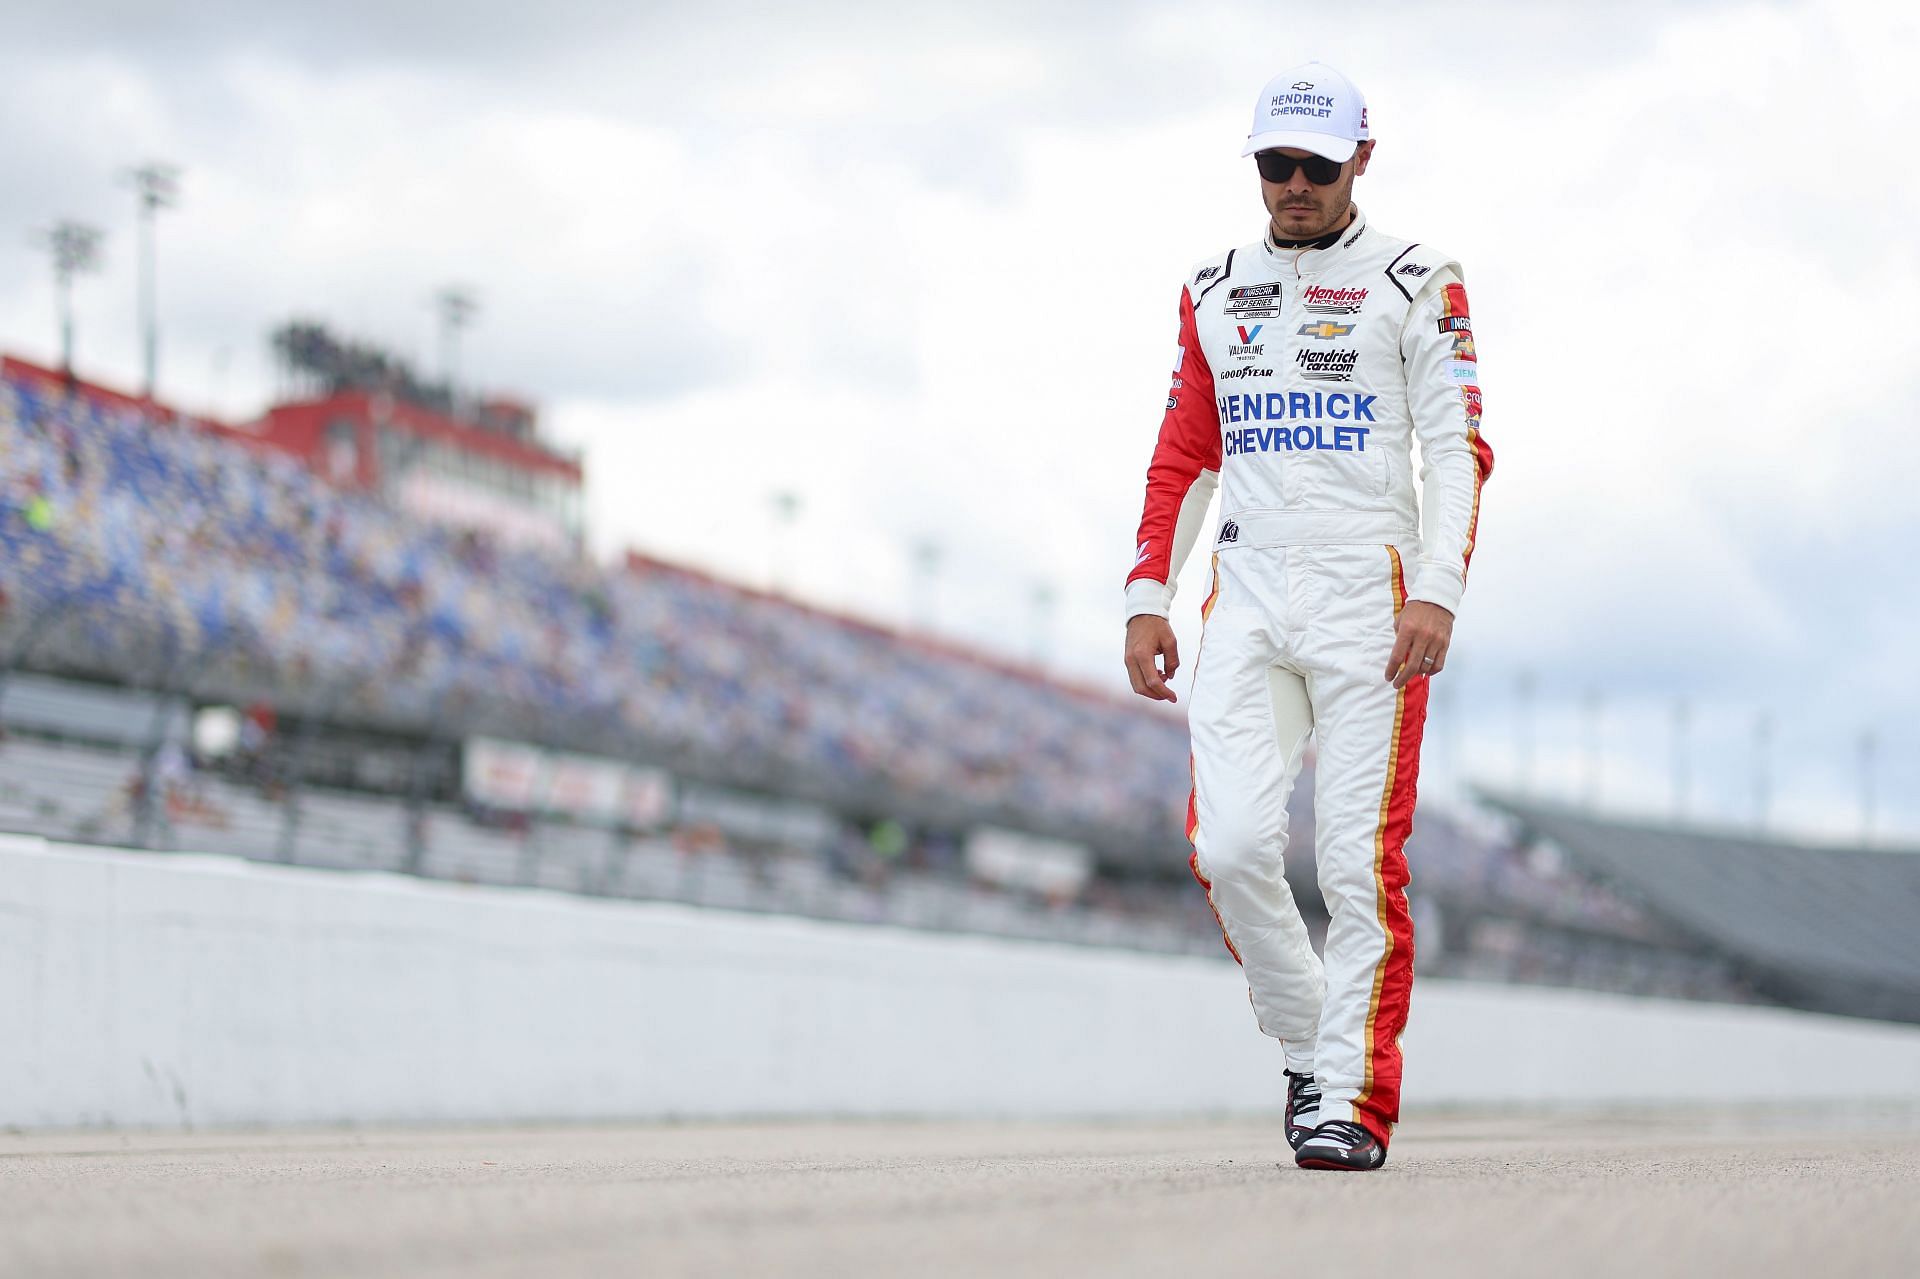 Kyle Larson walks the grid during qualifying for the NASCAR Cup Series Goodyear 400 at Darlington Raceway.